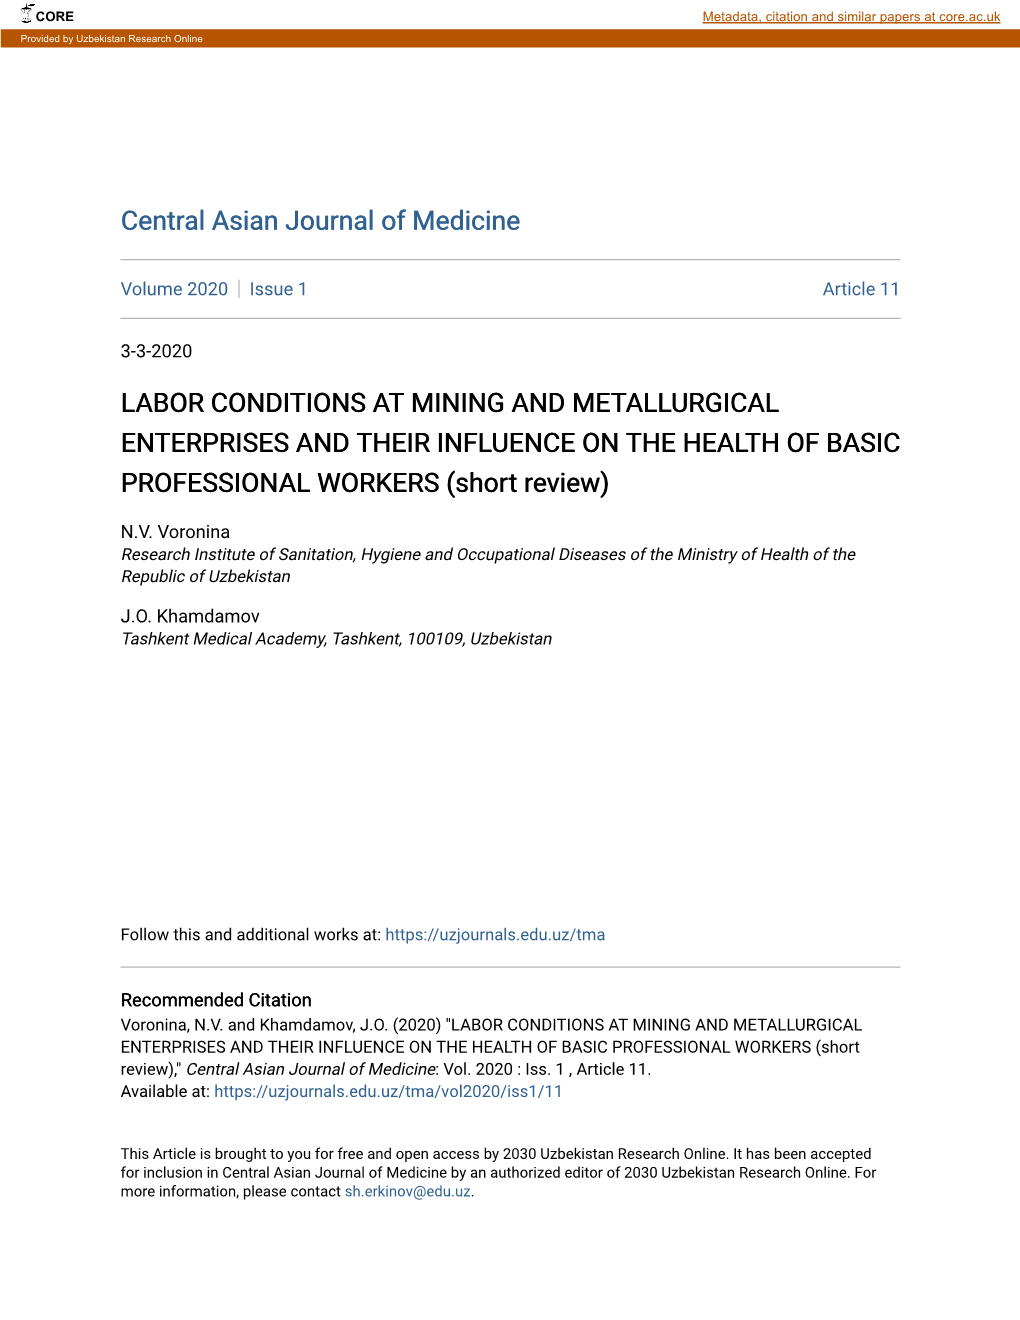 LABOR CONDITIONS at MINING and METALLURGICAL ENTERPRISES and THEIR INFLUENCE on the HEALTH of BASIC PROFESSIONAL WORKERS (Short Review)